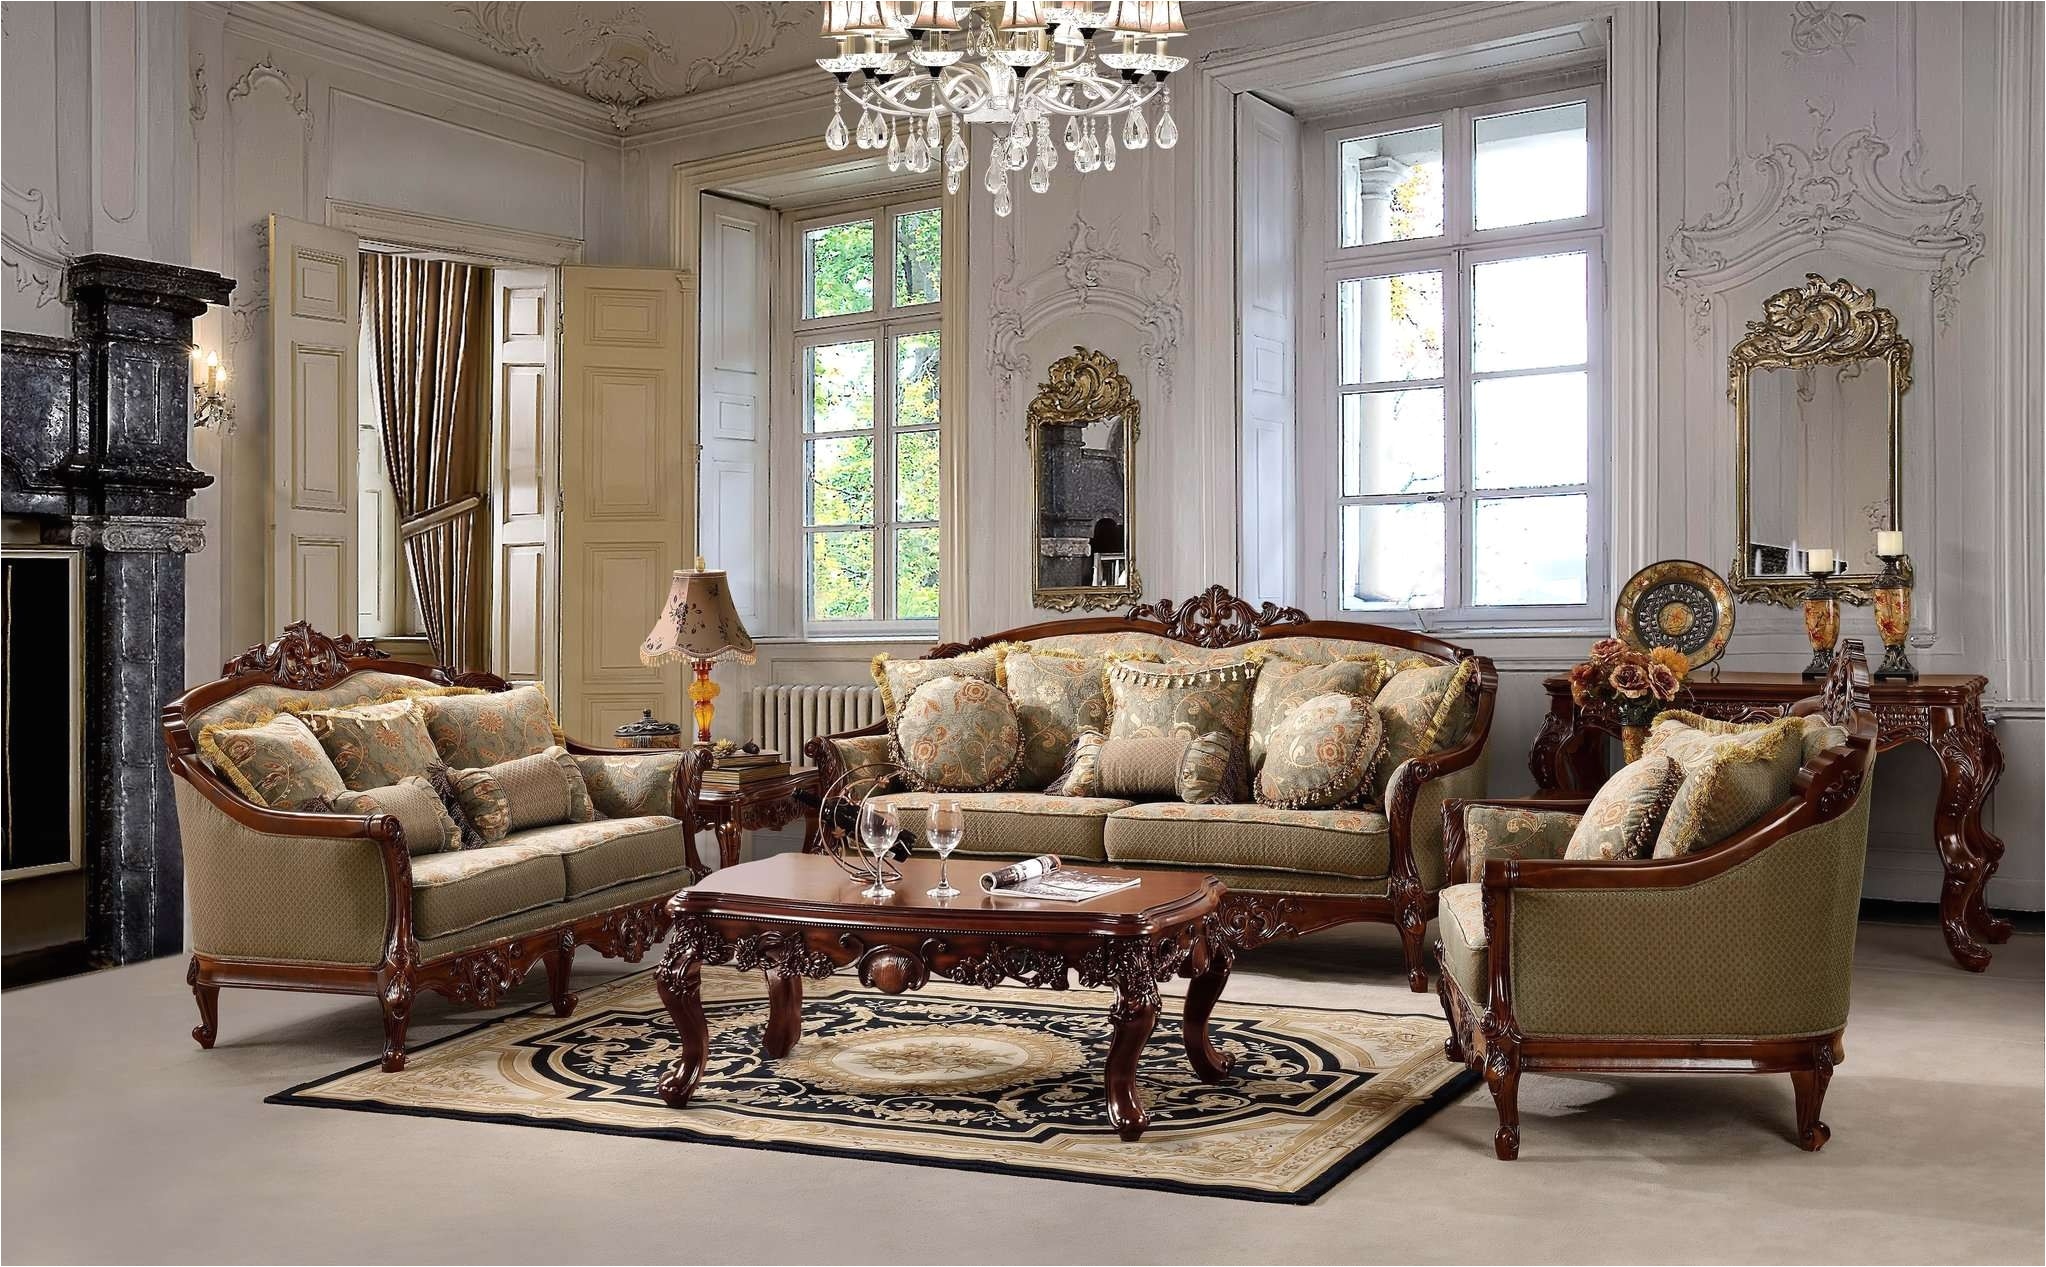 Beige Brown Living Room Decorating Ideas Noticeable Living Room Traditional Decorating Ideas Awesome Shaker Chairs 0d